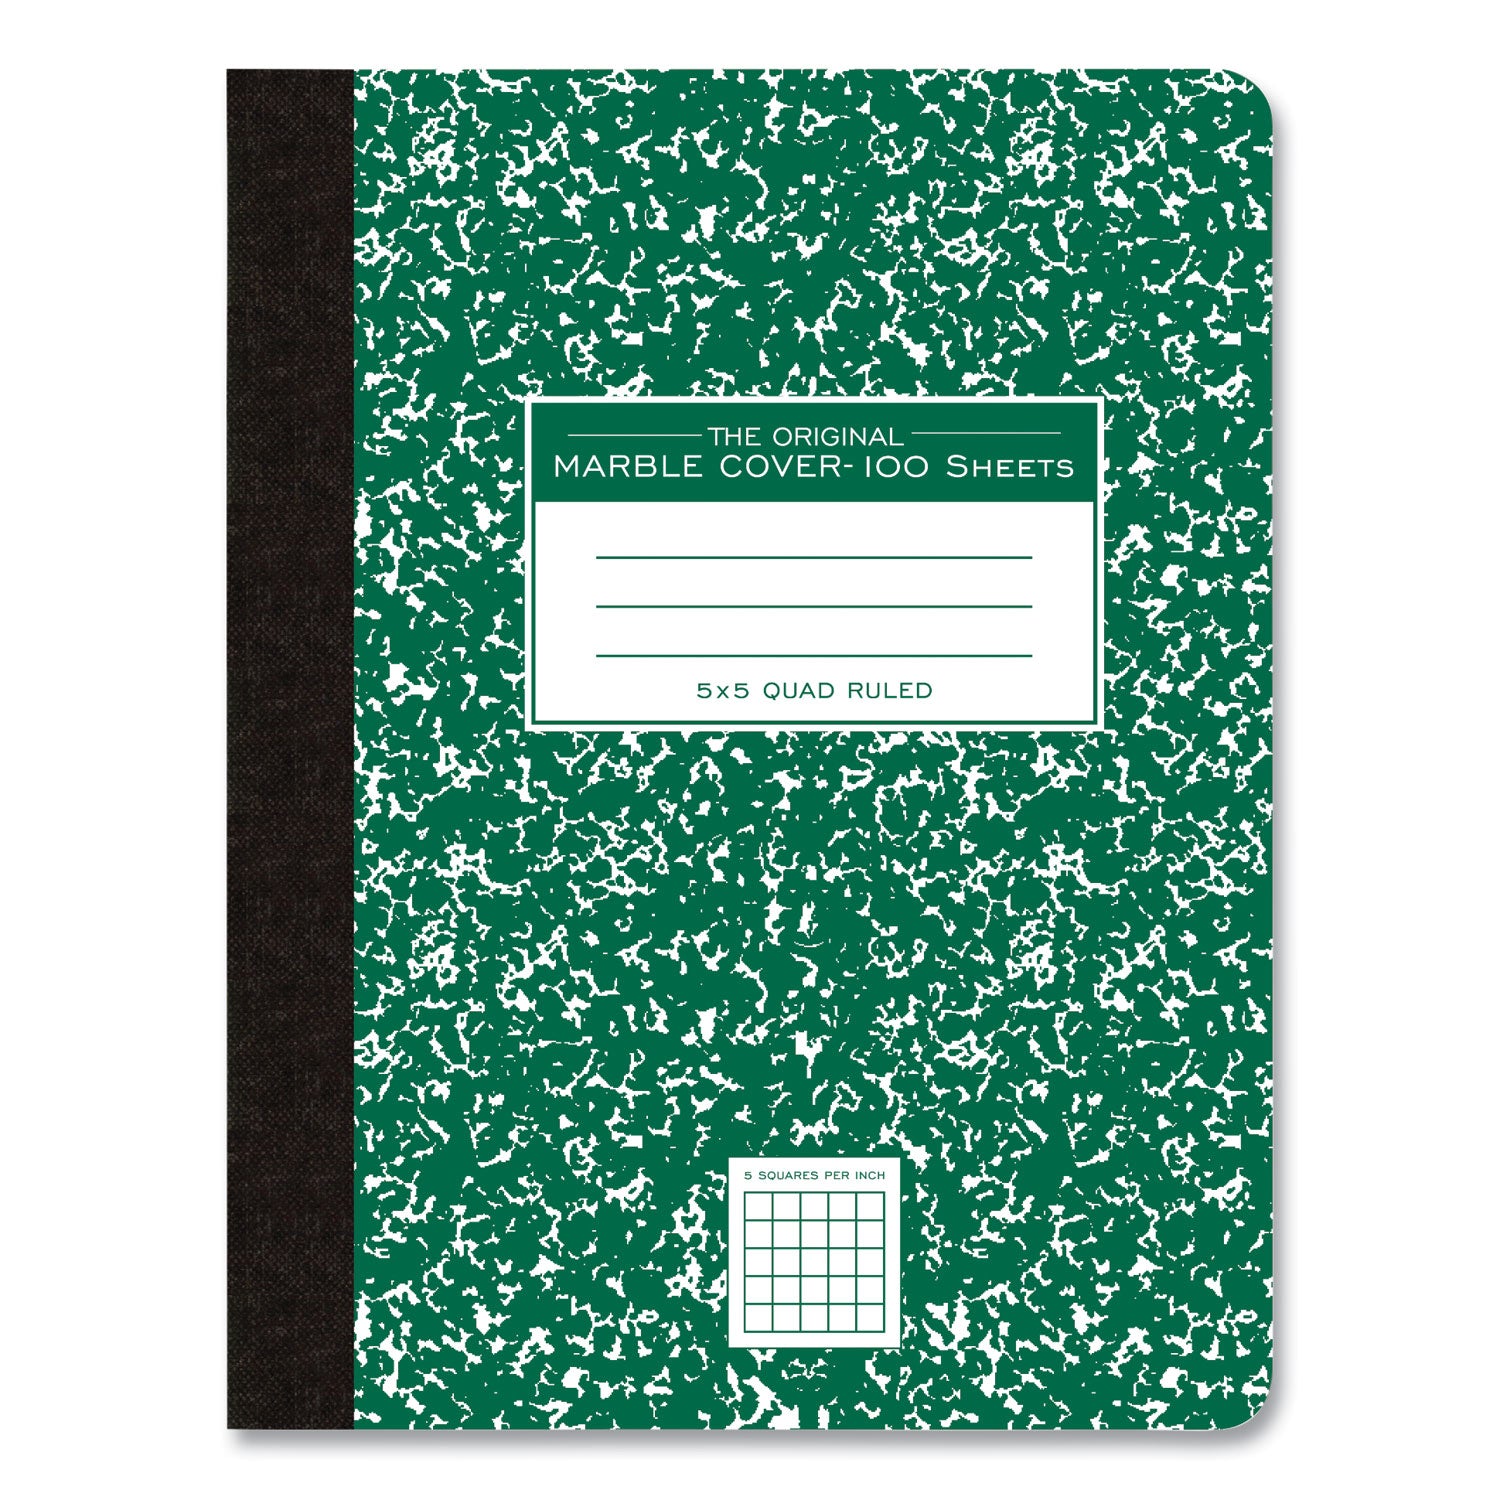 hardcover-composition-book-quadrille-5-sq-in-rule-green-marble-cover-100-975-x-75-sheet-24-ct-ships-in-4-6-bus-days_roa77255cs - 2